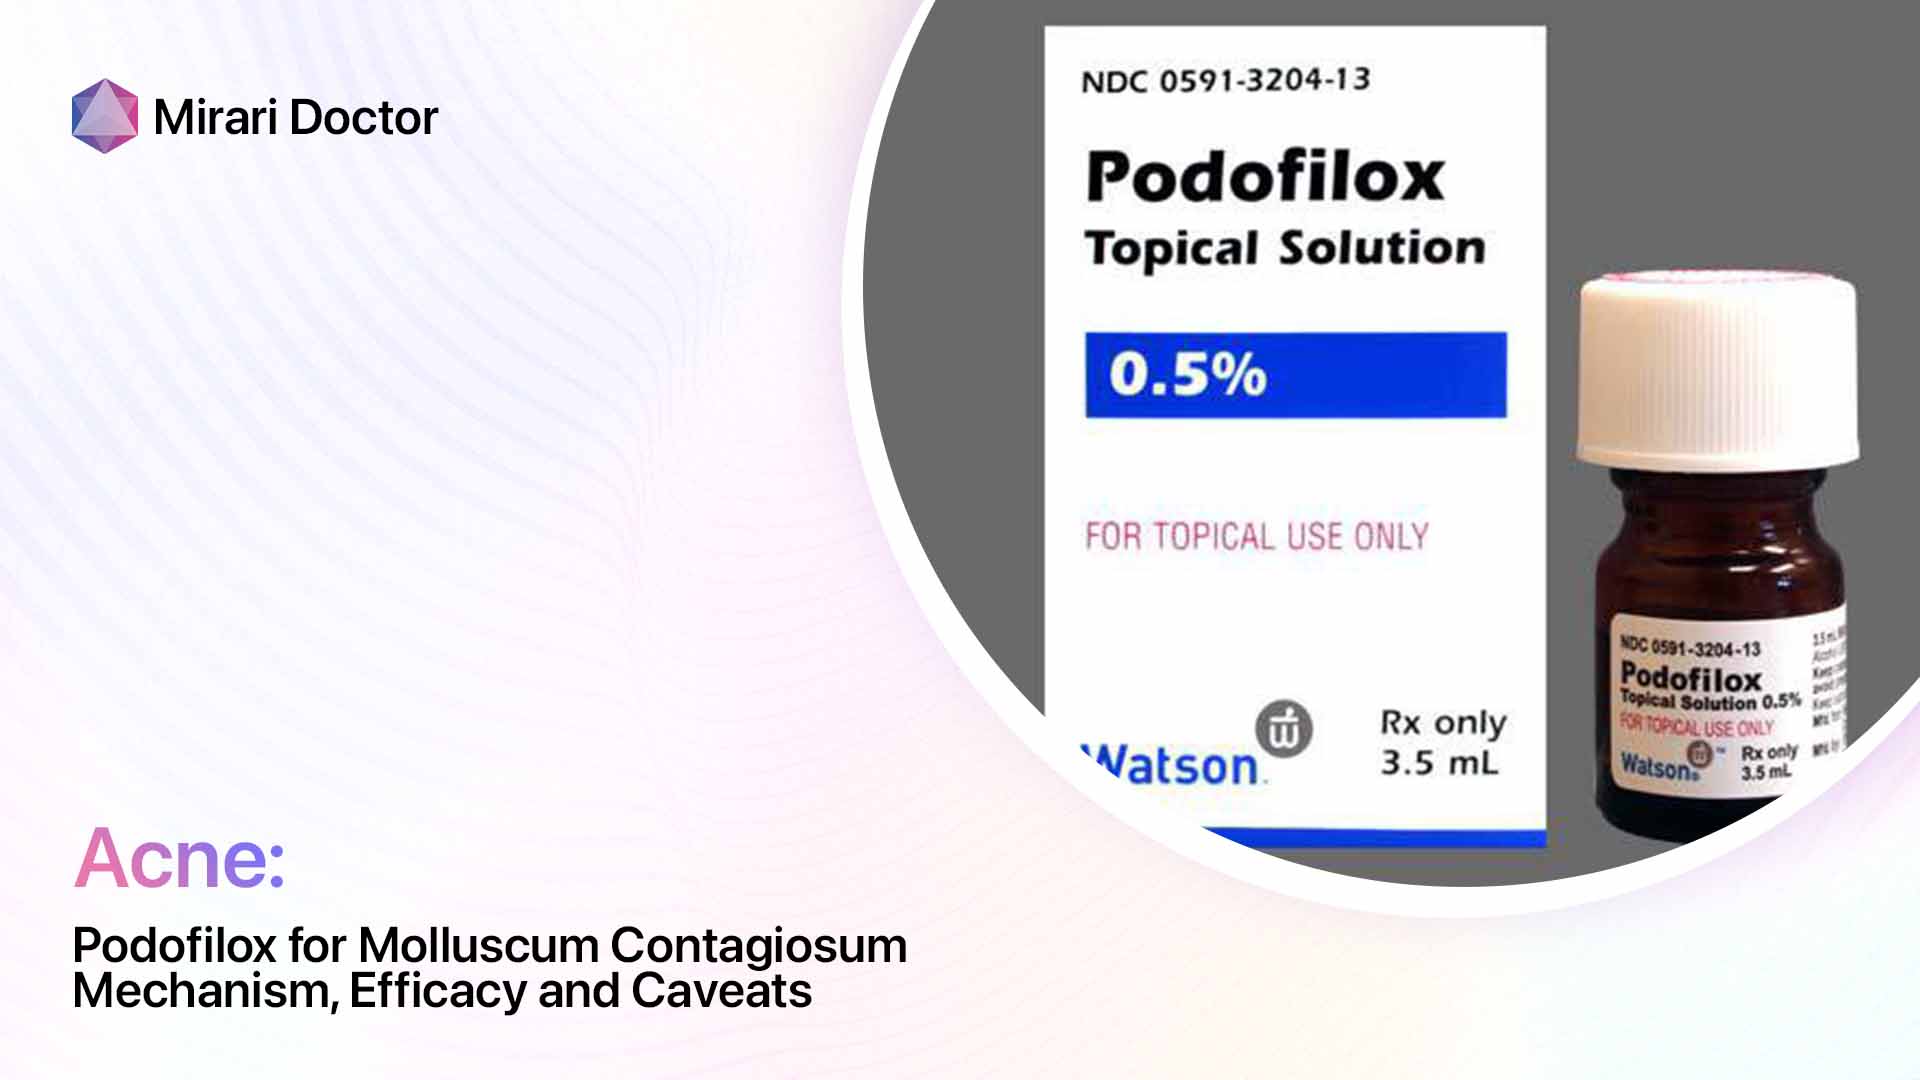 Featured image for “Podofilox for Molluscum Contagiosum: Mechanism, Efficacy and Caveats”